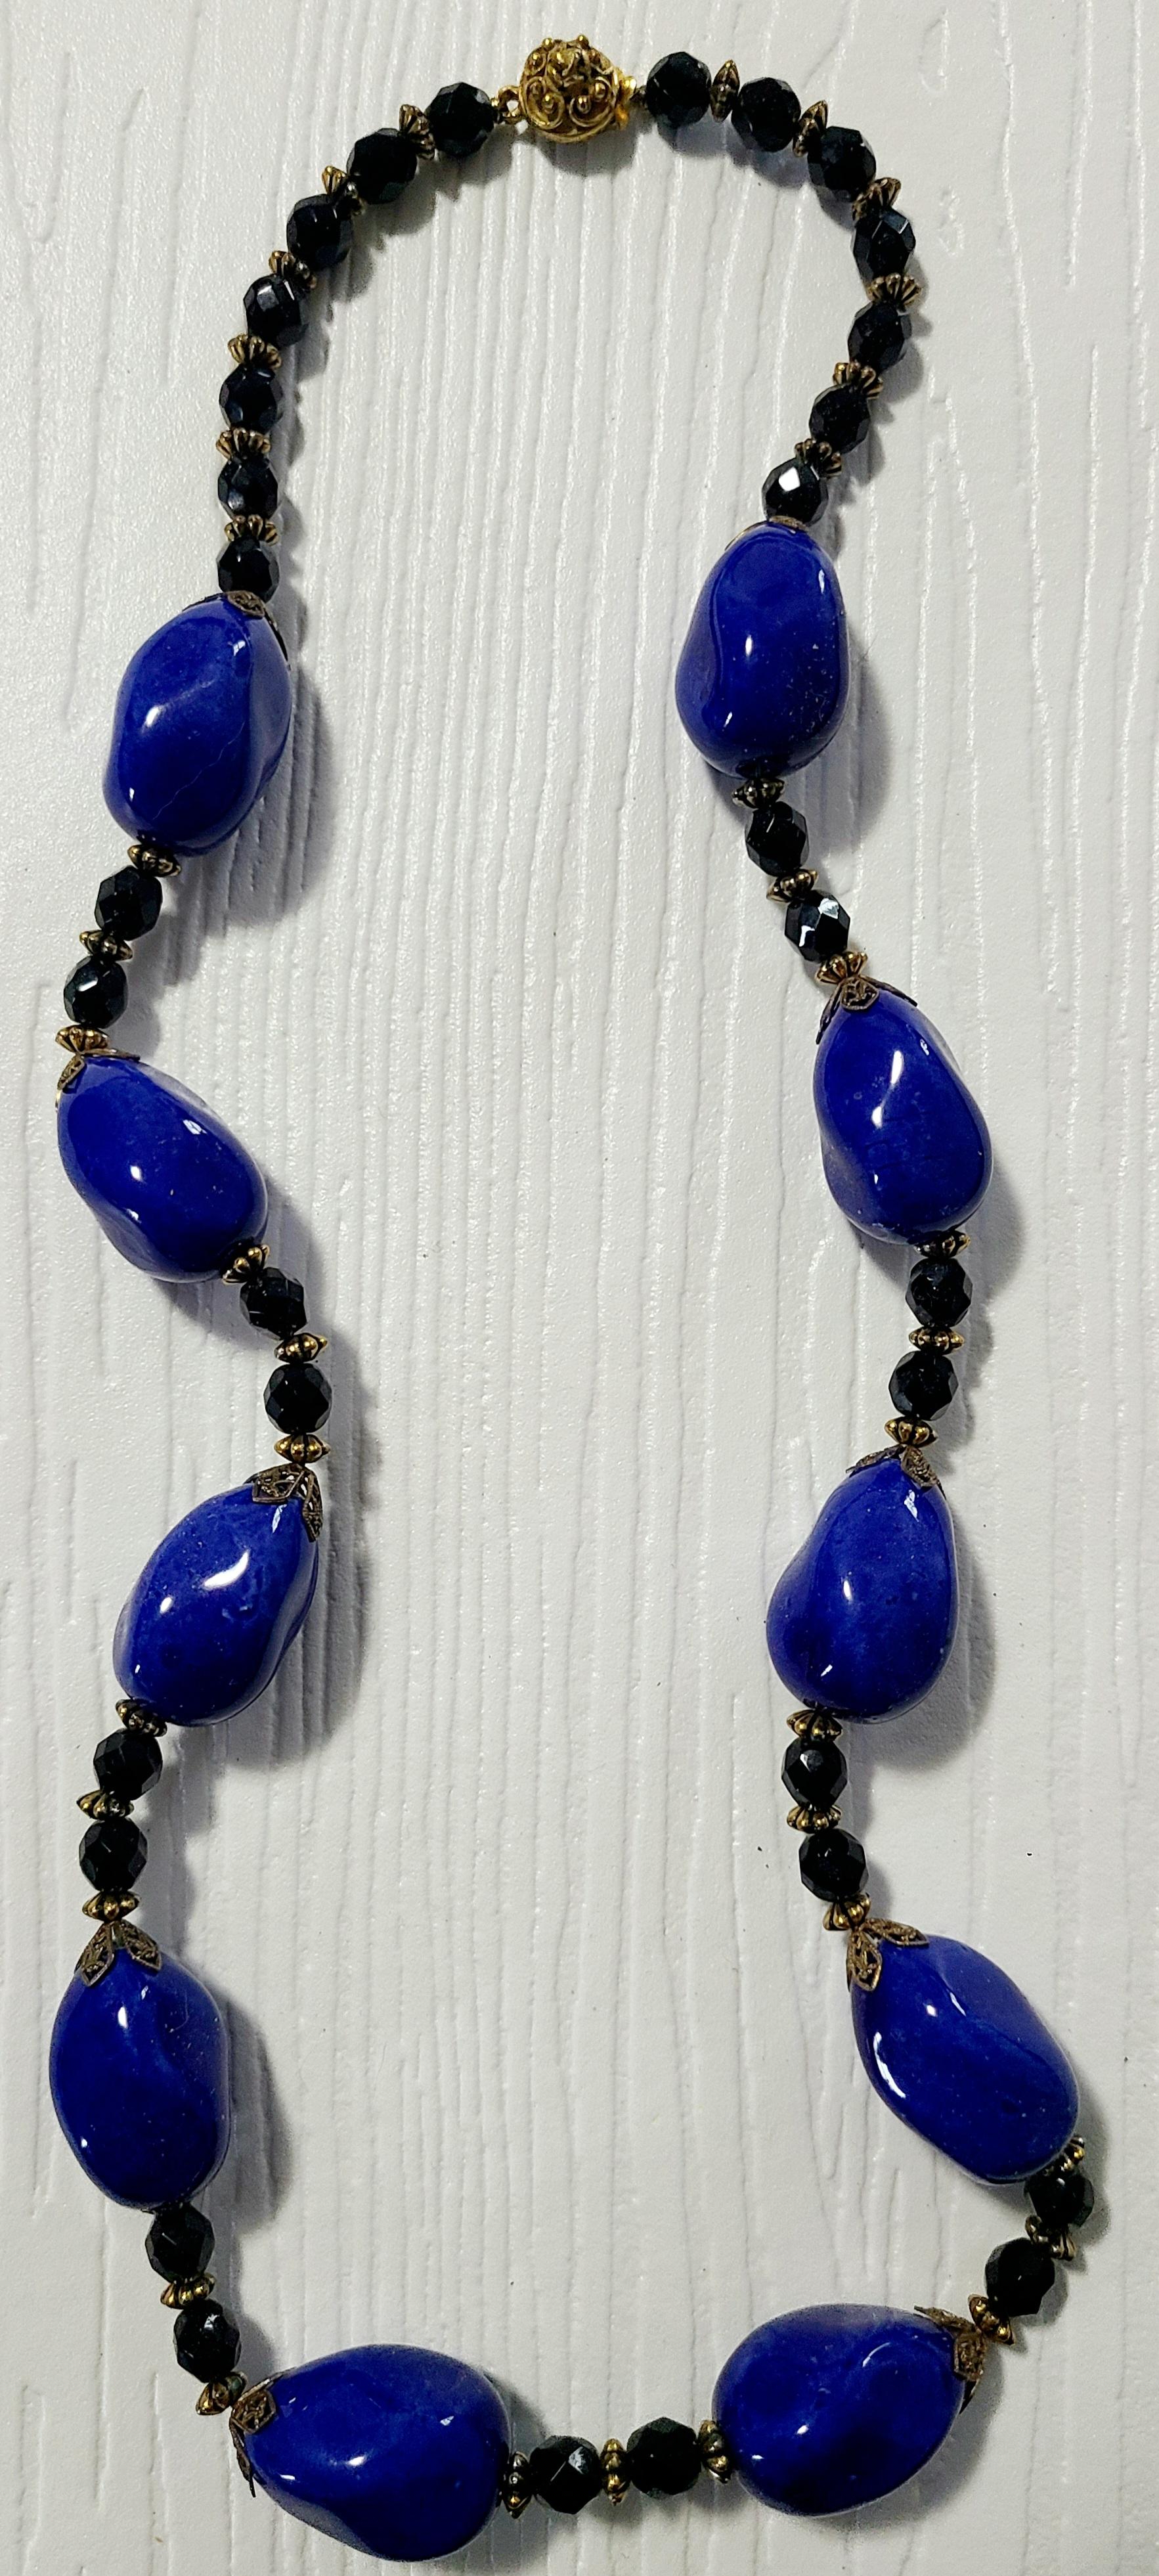 Hand-blown glass cobalt beads and black spinel beads are hand strung in this statement piece from the Early 1950s.

The history of the brand “Original by Robert” dates back to 1942. Founded by Robert Levy, David Jaffee, and Irving Landsman as